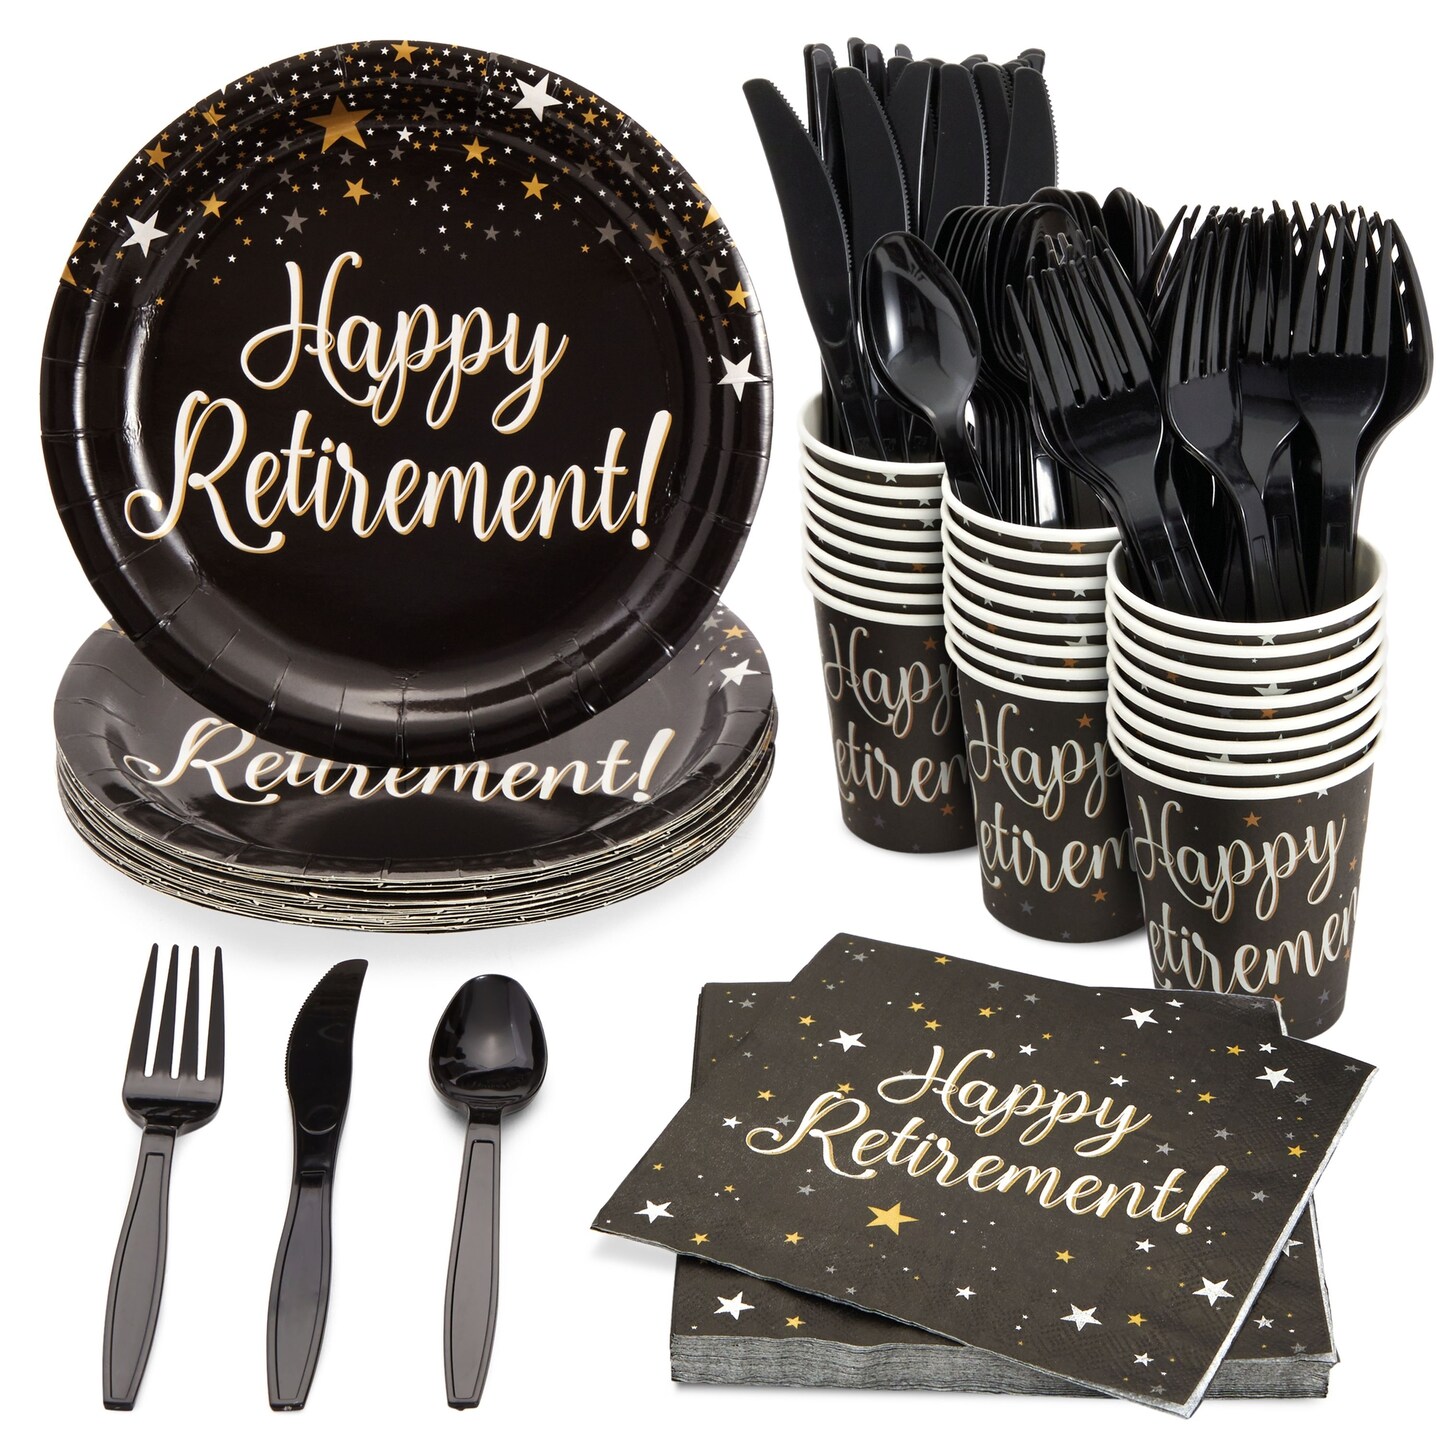 144 Pieces Happy Retirement Decorations for Party Supplies with Disposable Dinnerware Set, Napkins, Paper Plates, Cups, Cutlery (24 Guests)